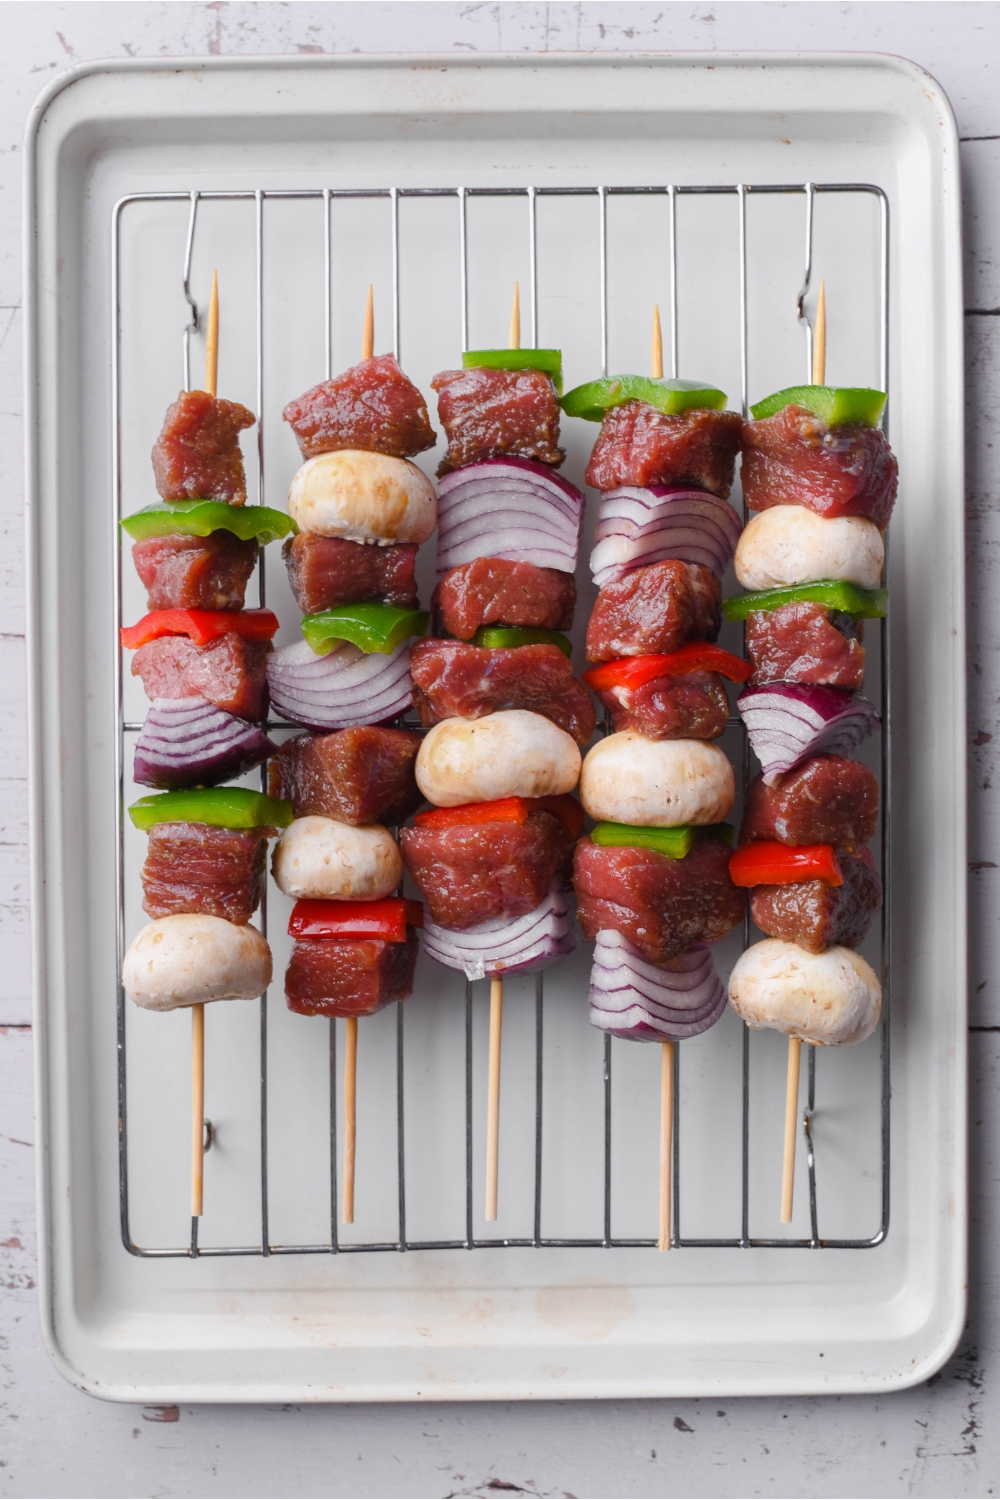 Five uncooked skewers of marinated steak, bell peppers, red onions, and mushrooms lined on a wire rack atop a baking sheet.